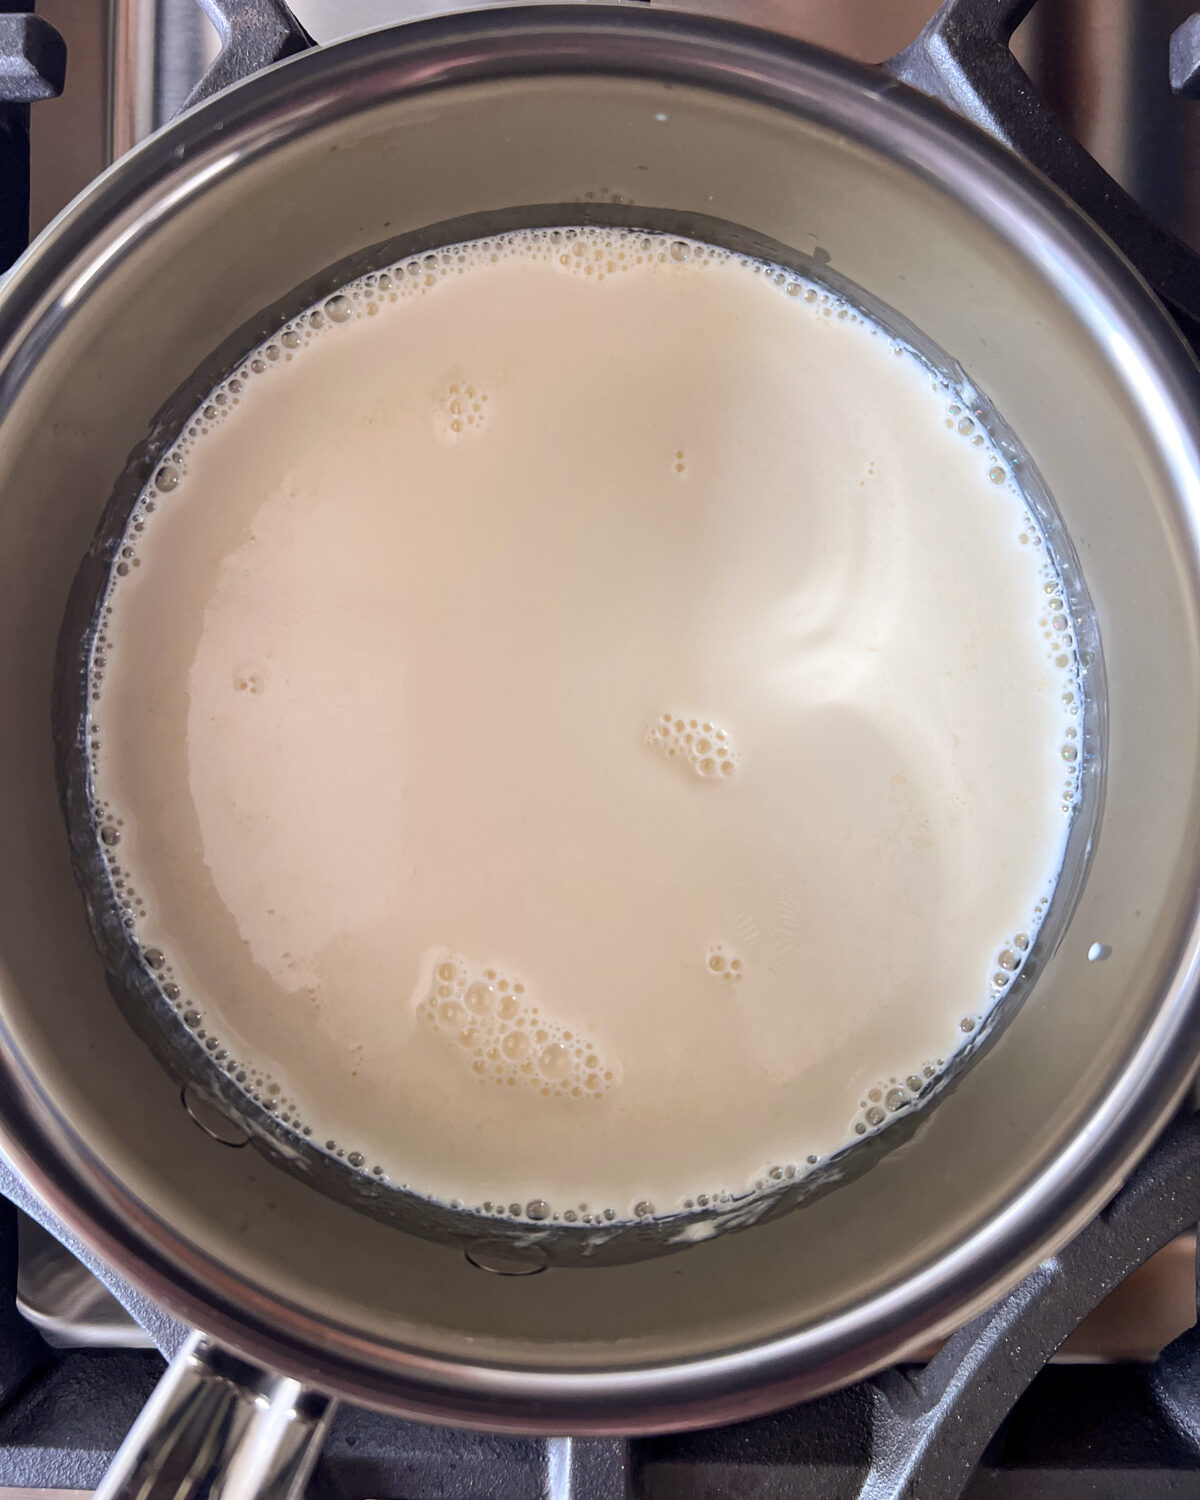 Warm the cream in a pot until bubbles appear at the edges.